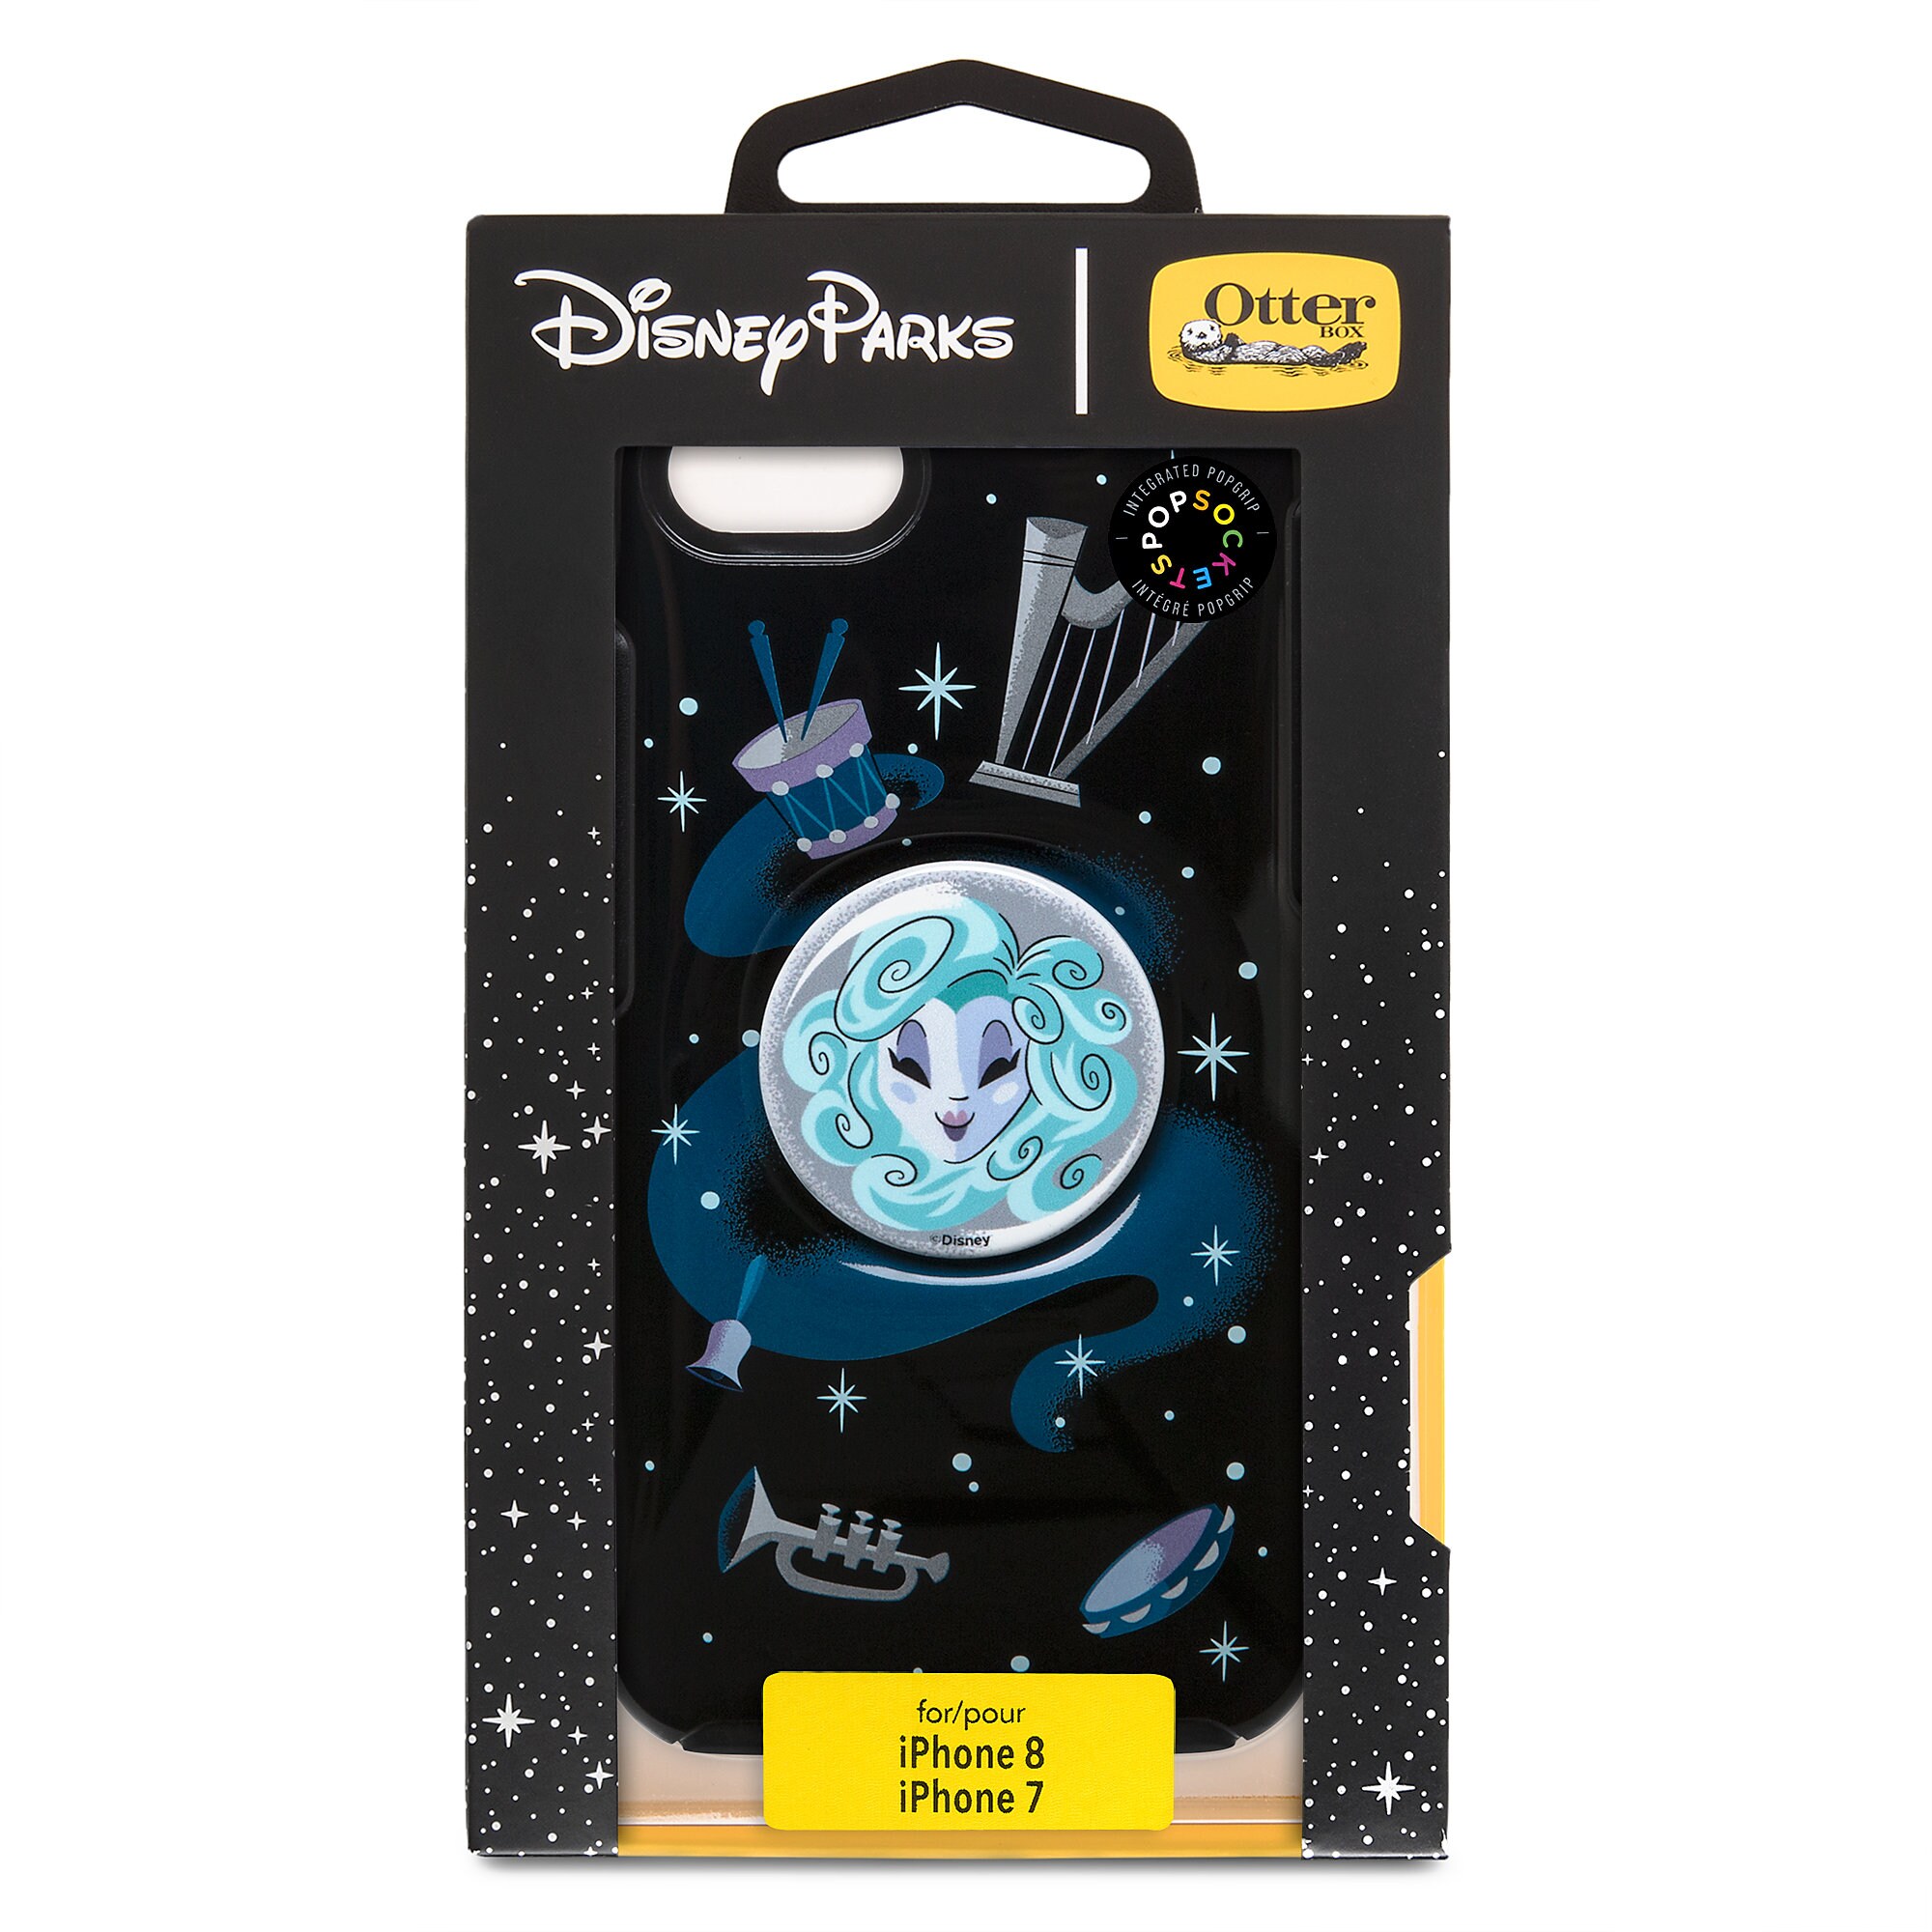 Madame Leota OtterBox iPhone 8/7 Case with PopSockets PopGrip - The Haunted Mansion